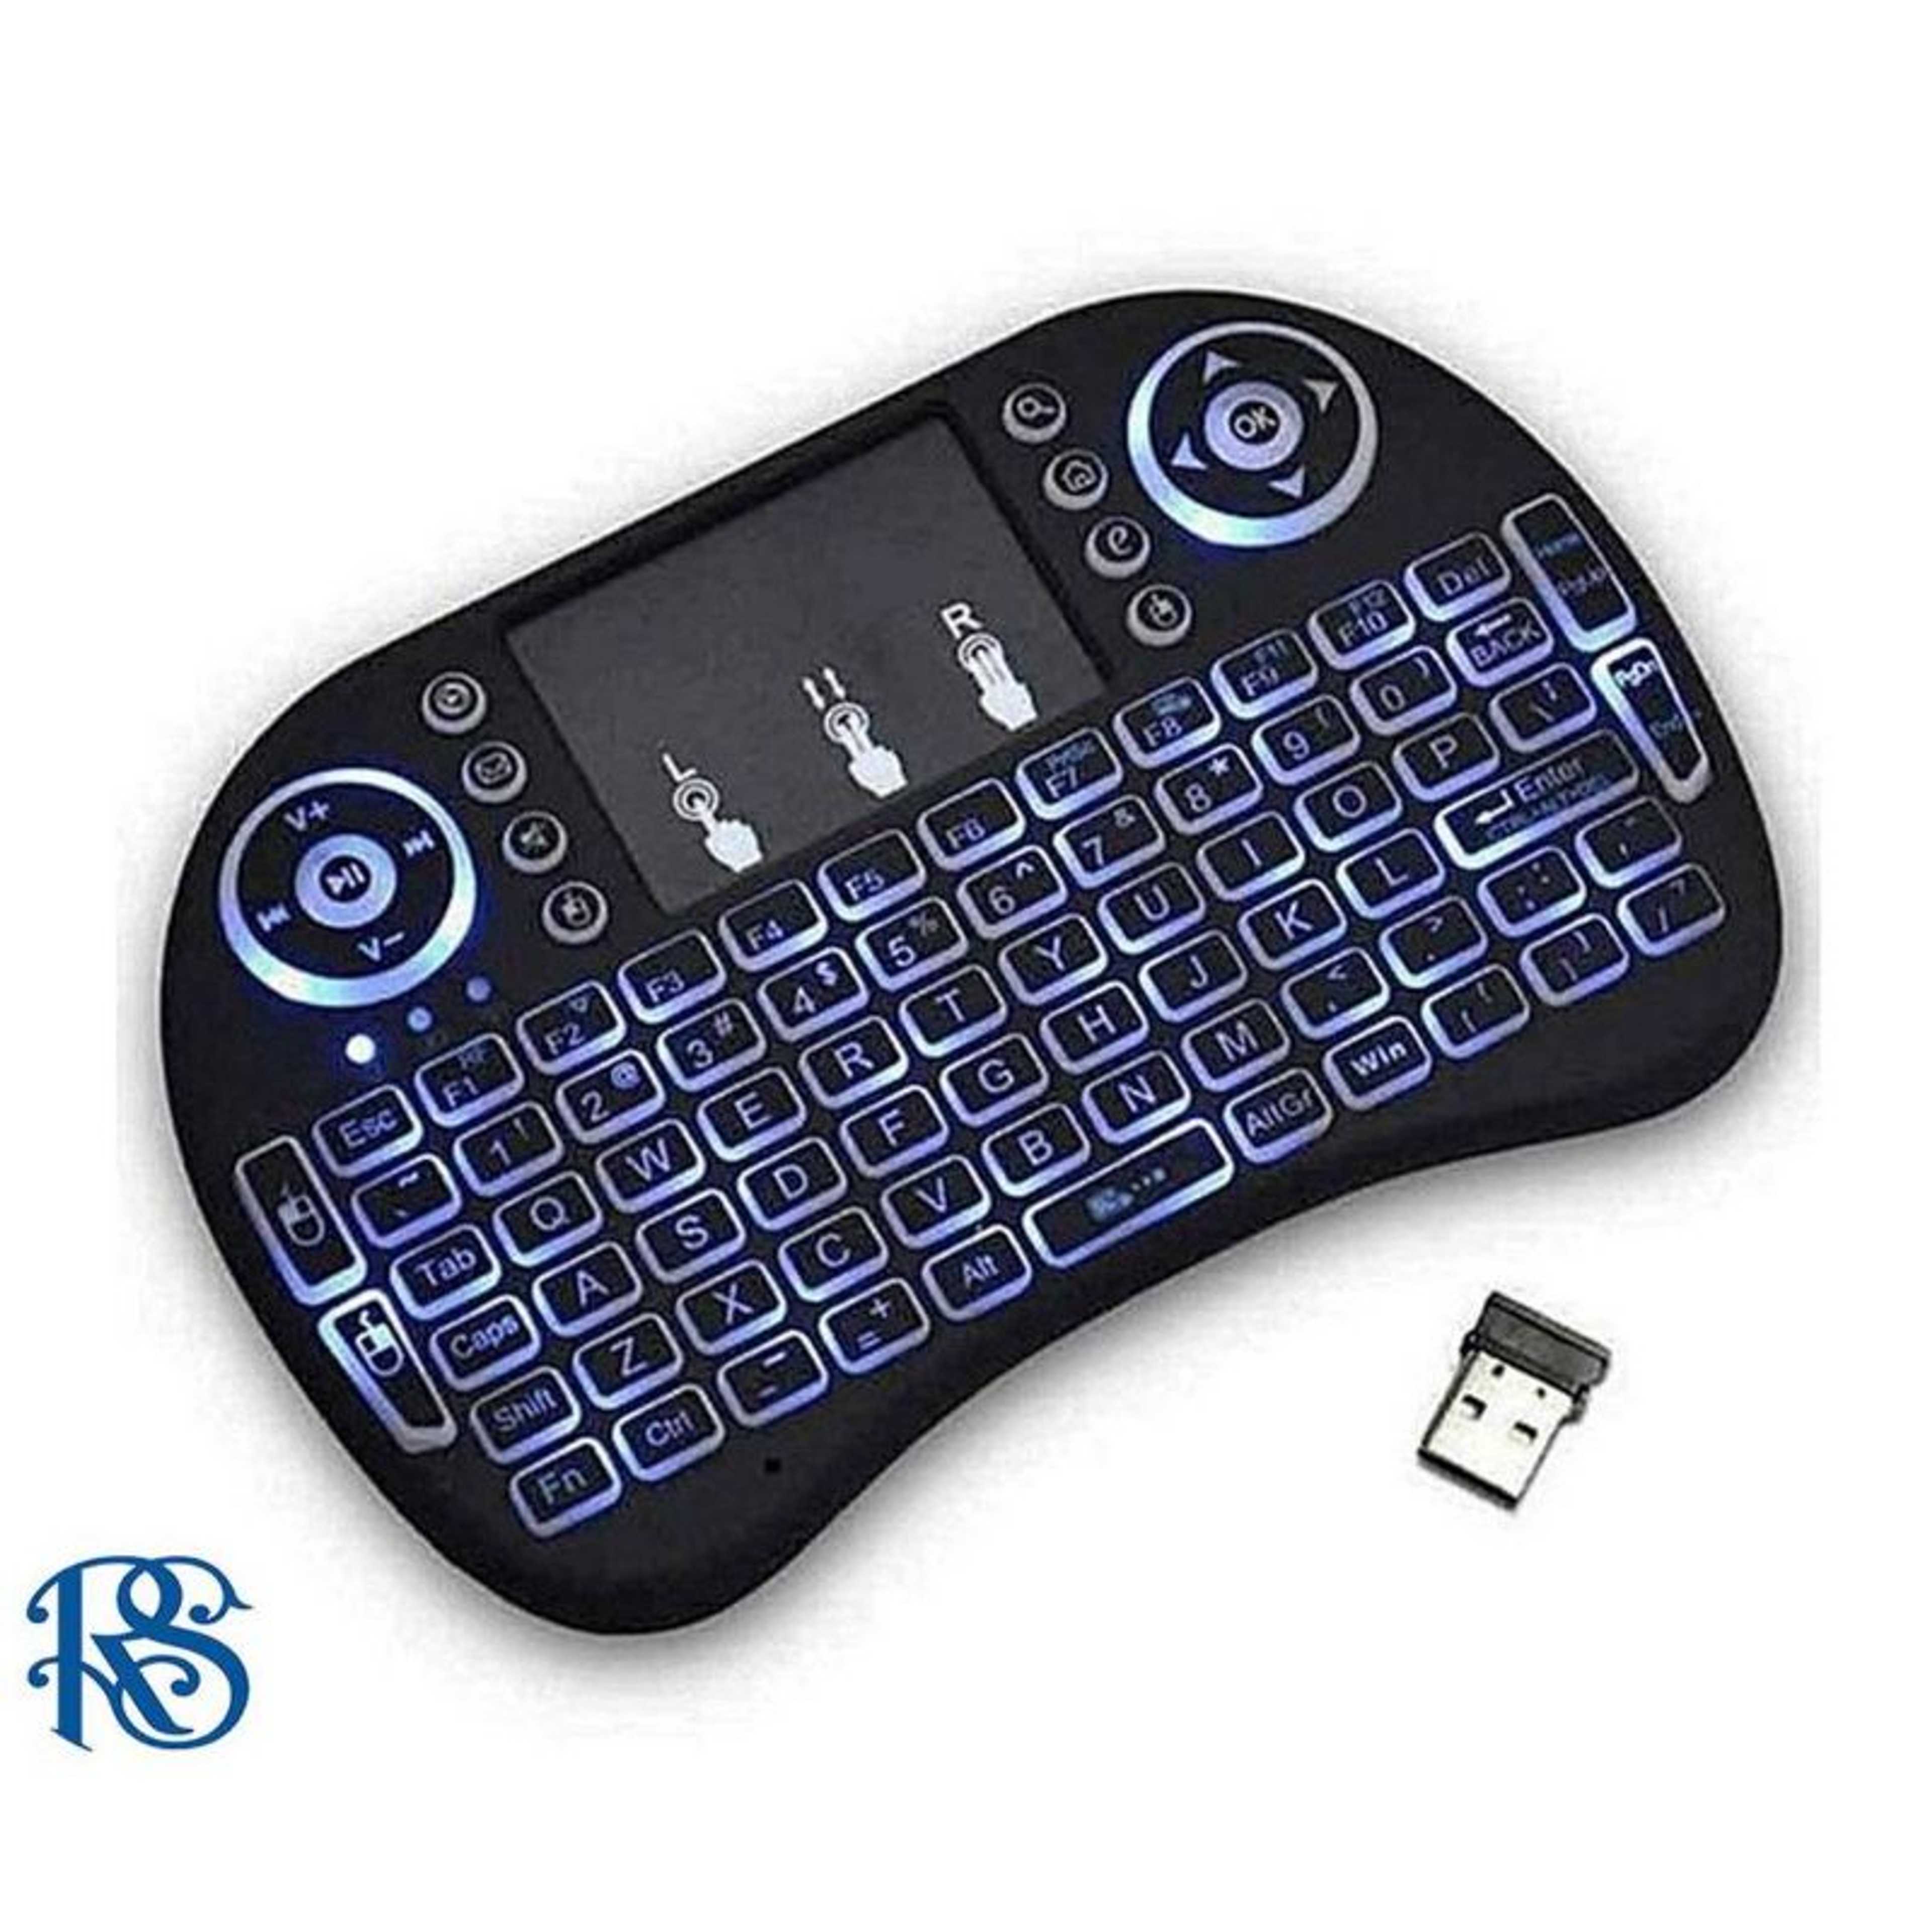 Mini Touch Pad Rf 500 Wireless With 3 Colour Backlight Keyboard Mouse - Black